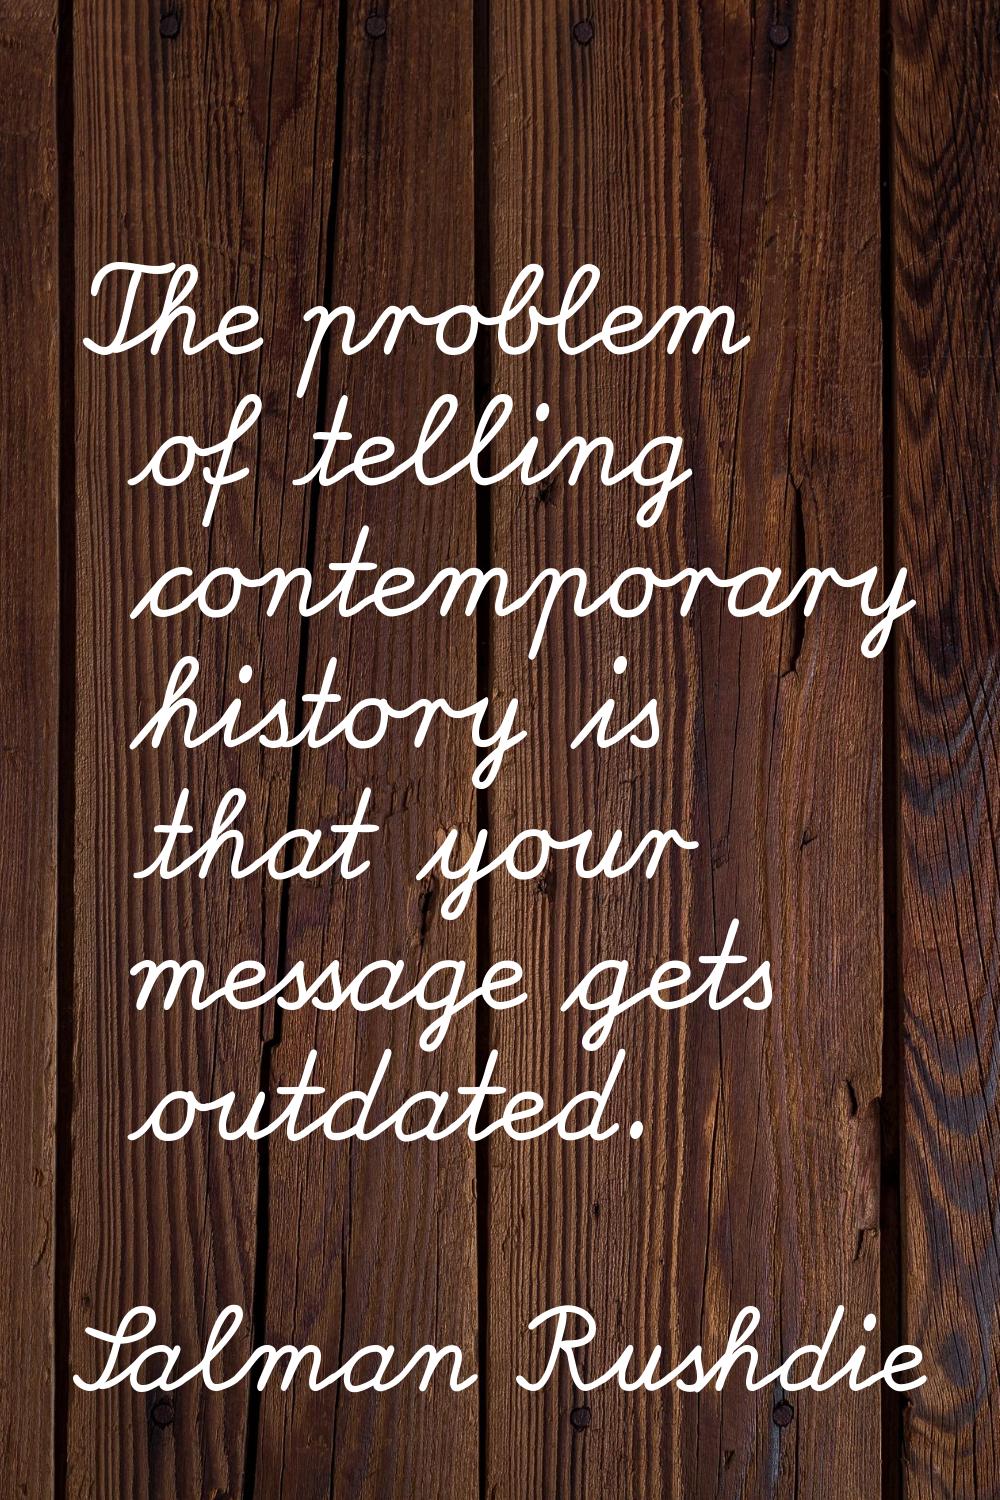 The problem of telling contemporary history is that your message gets outdated.